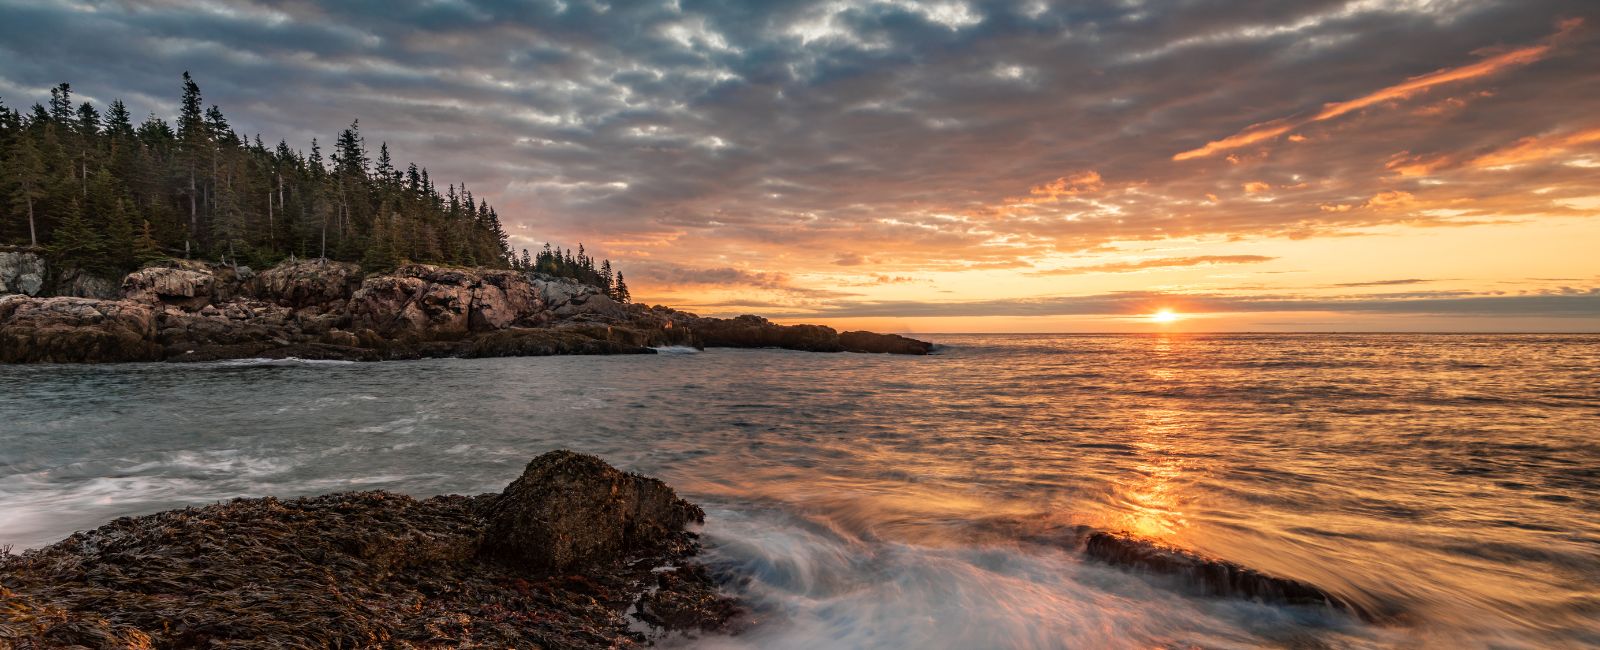 A cloudy sky and light orange sunset over the ocean and rocky shore at Acadia National Park in Maine